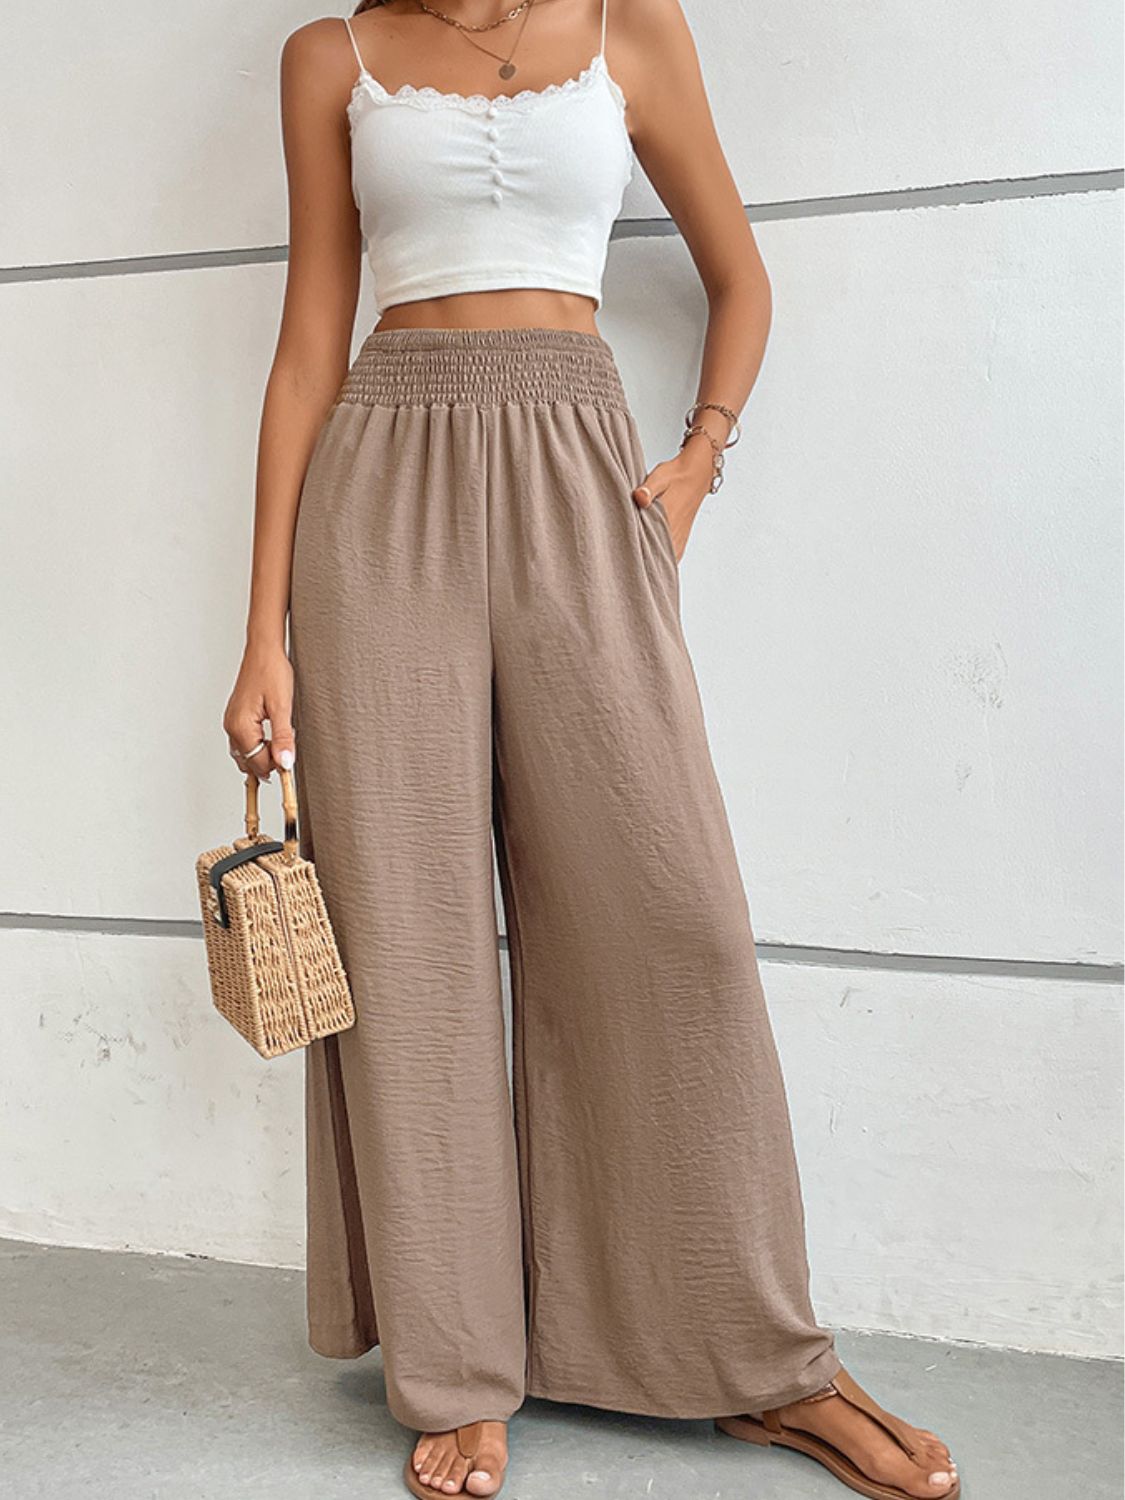 Wide Waistband Relax Fit Pants - ONLINE EXCLUSIVE